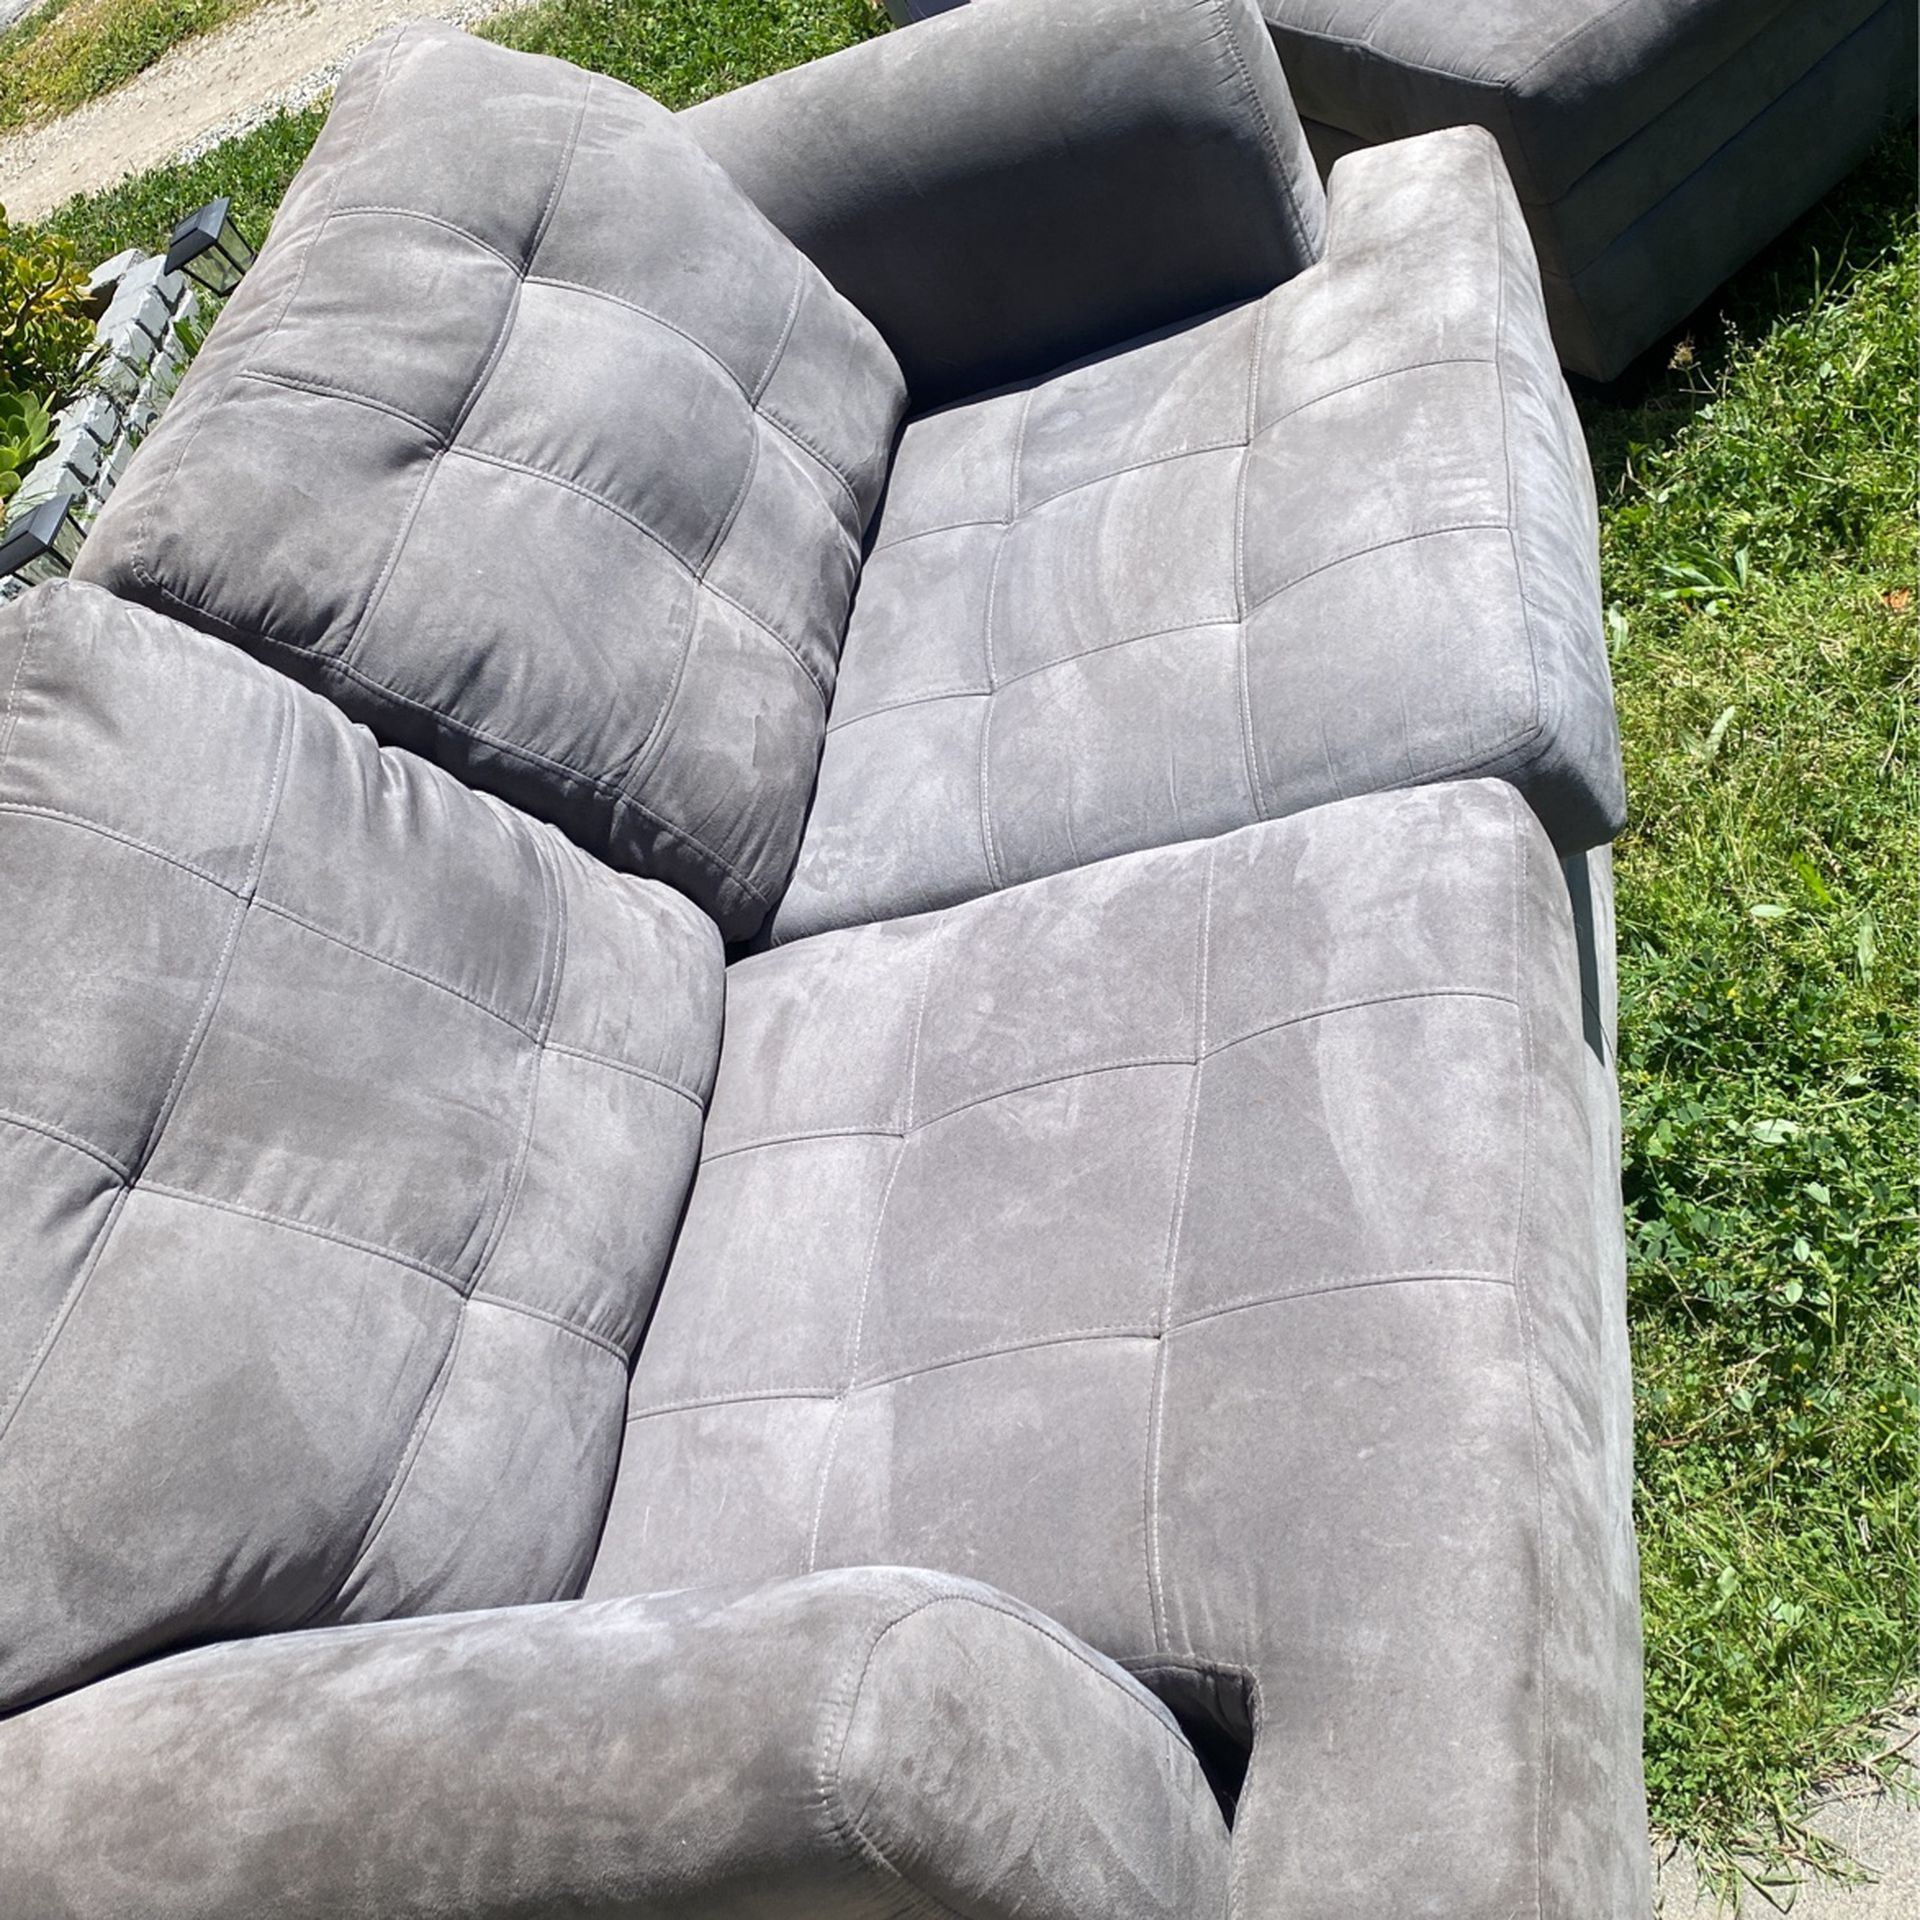 Grey couches